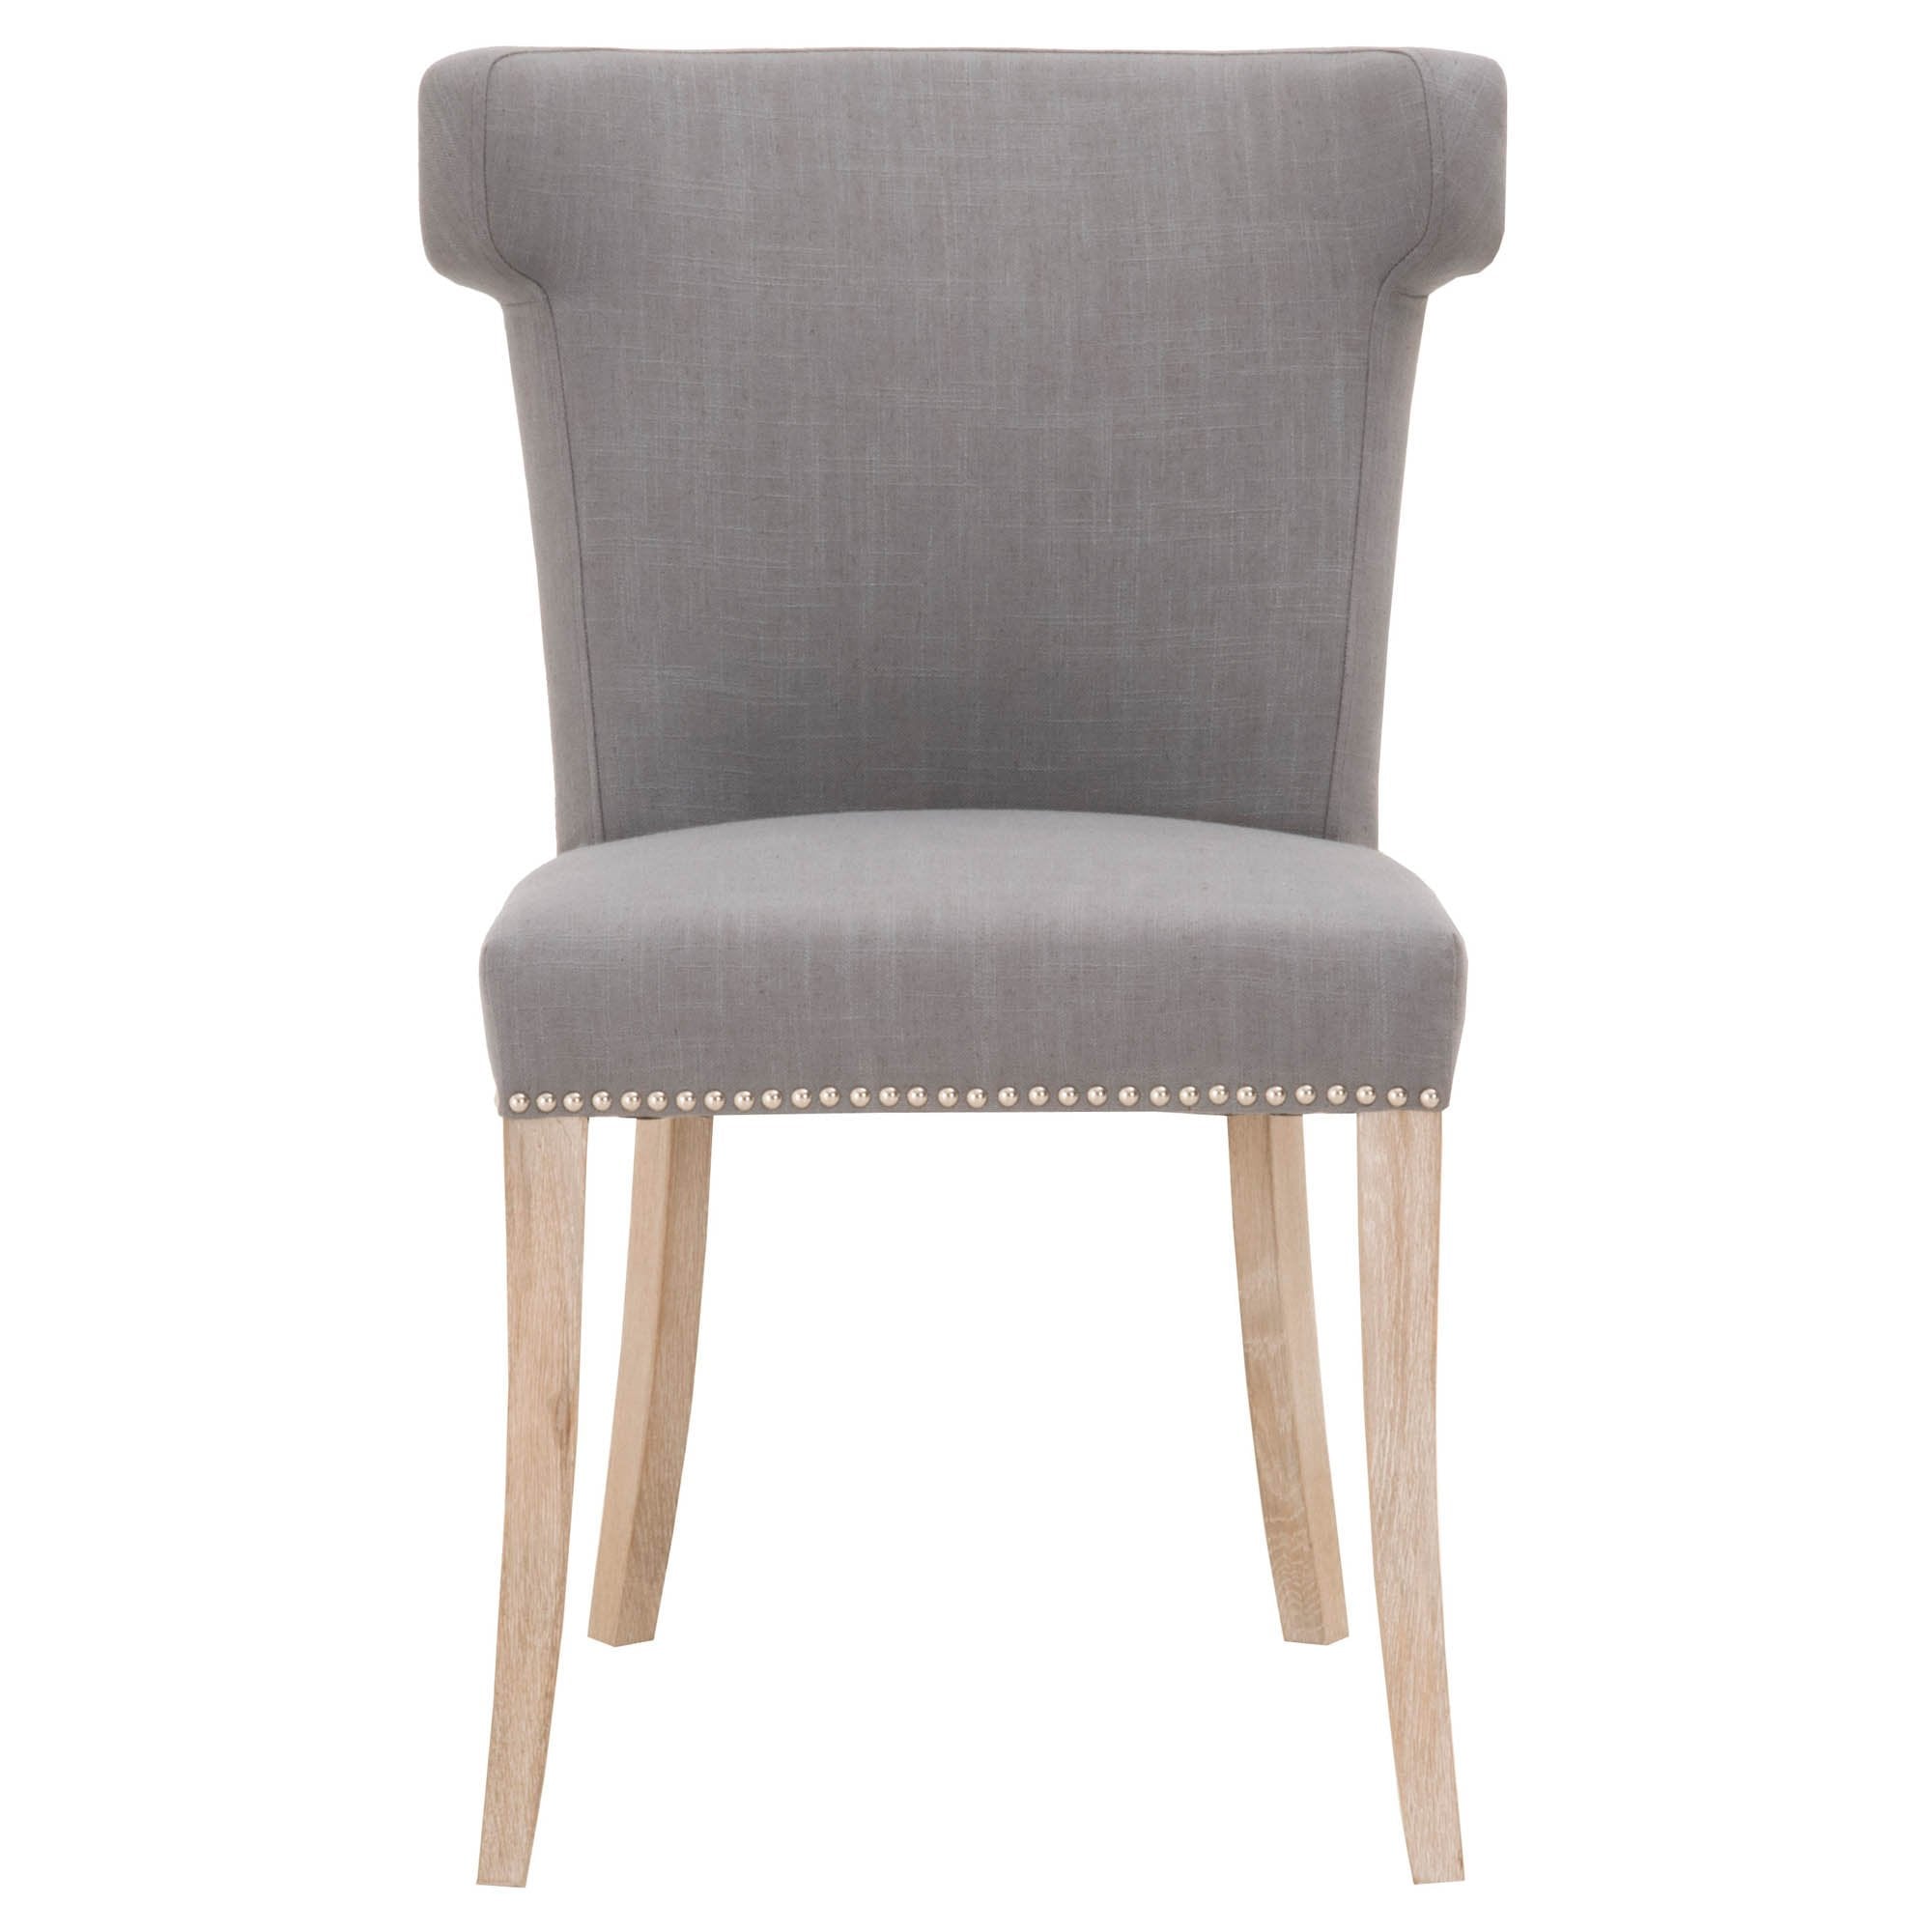 Celina Dining Chair in Natural Gray